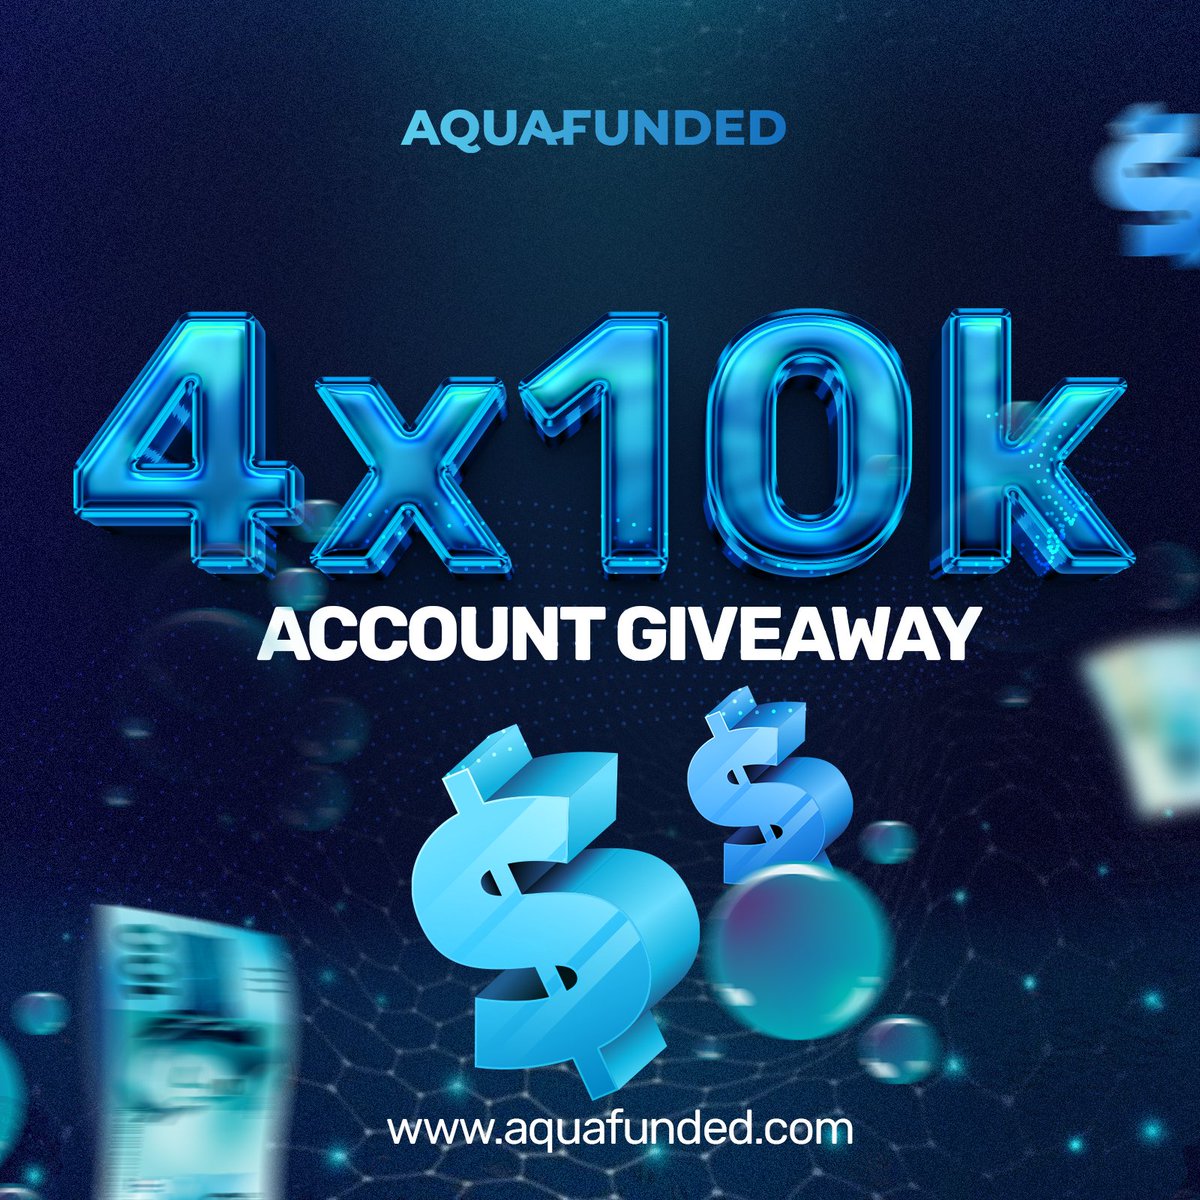 🌊 4*10k Giveaway

🌊  Follow @AyegboEmmanuel @AquaFunded @TheToff_
@QueenTea__ @ronna256 @Abubakar_Tradr

🌊 Like♥️, Repost and tag 4 trading friends

🌊Repost pinned tweet and stay active on page.

Turn on notifications